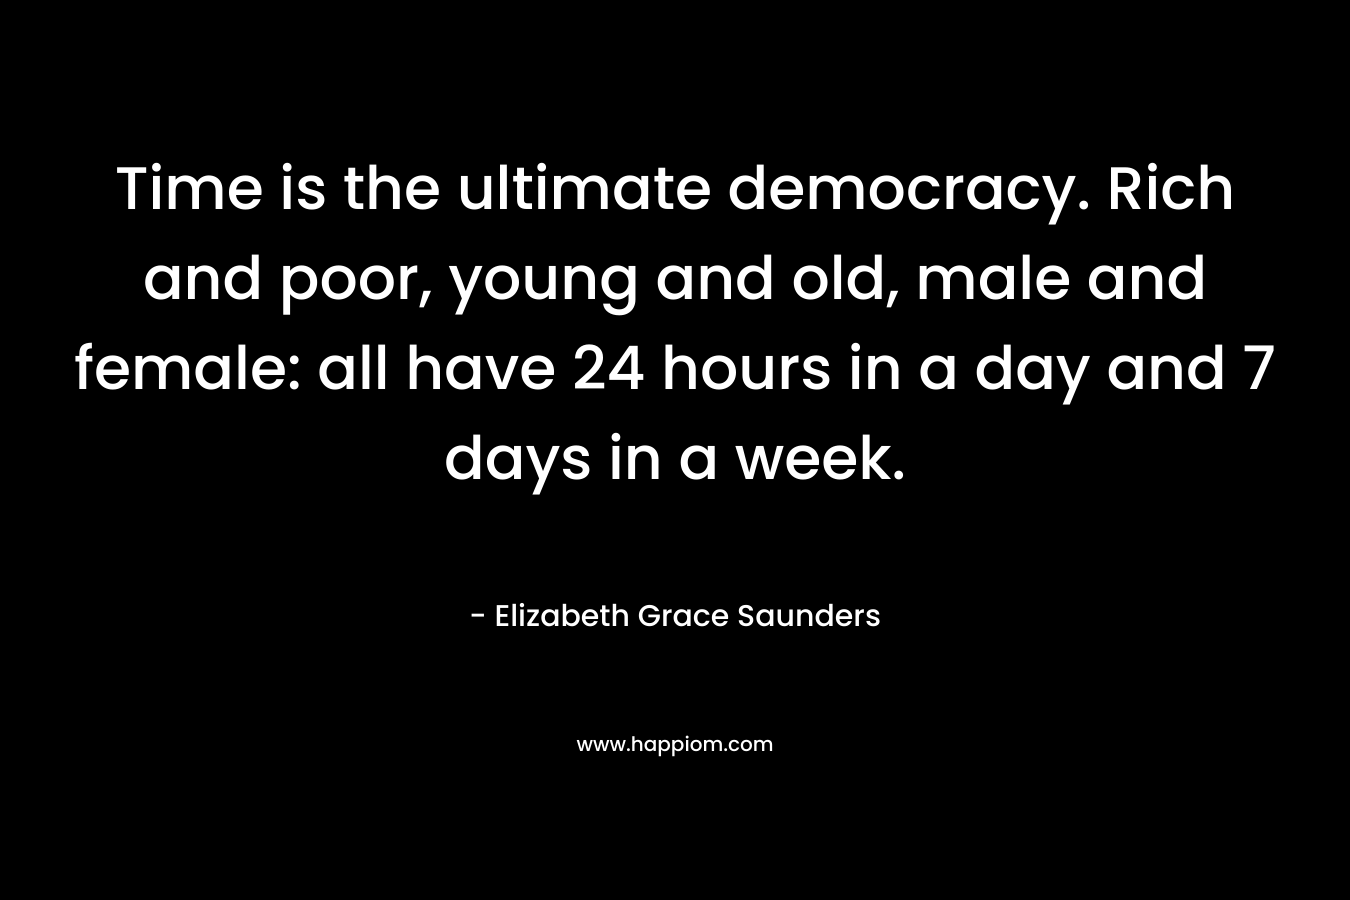 Time is the ultimate democracy. Rich and poor, young and old, male and female: all have 24 hours in a day and 7 days in a week.